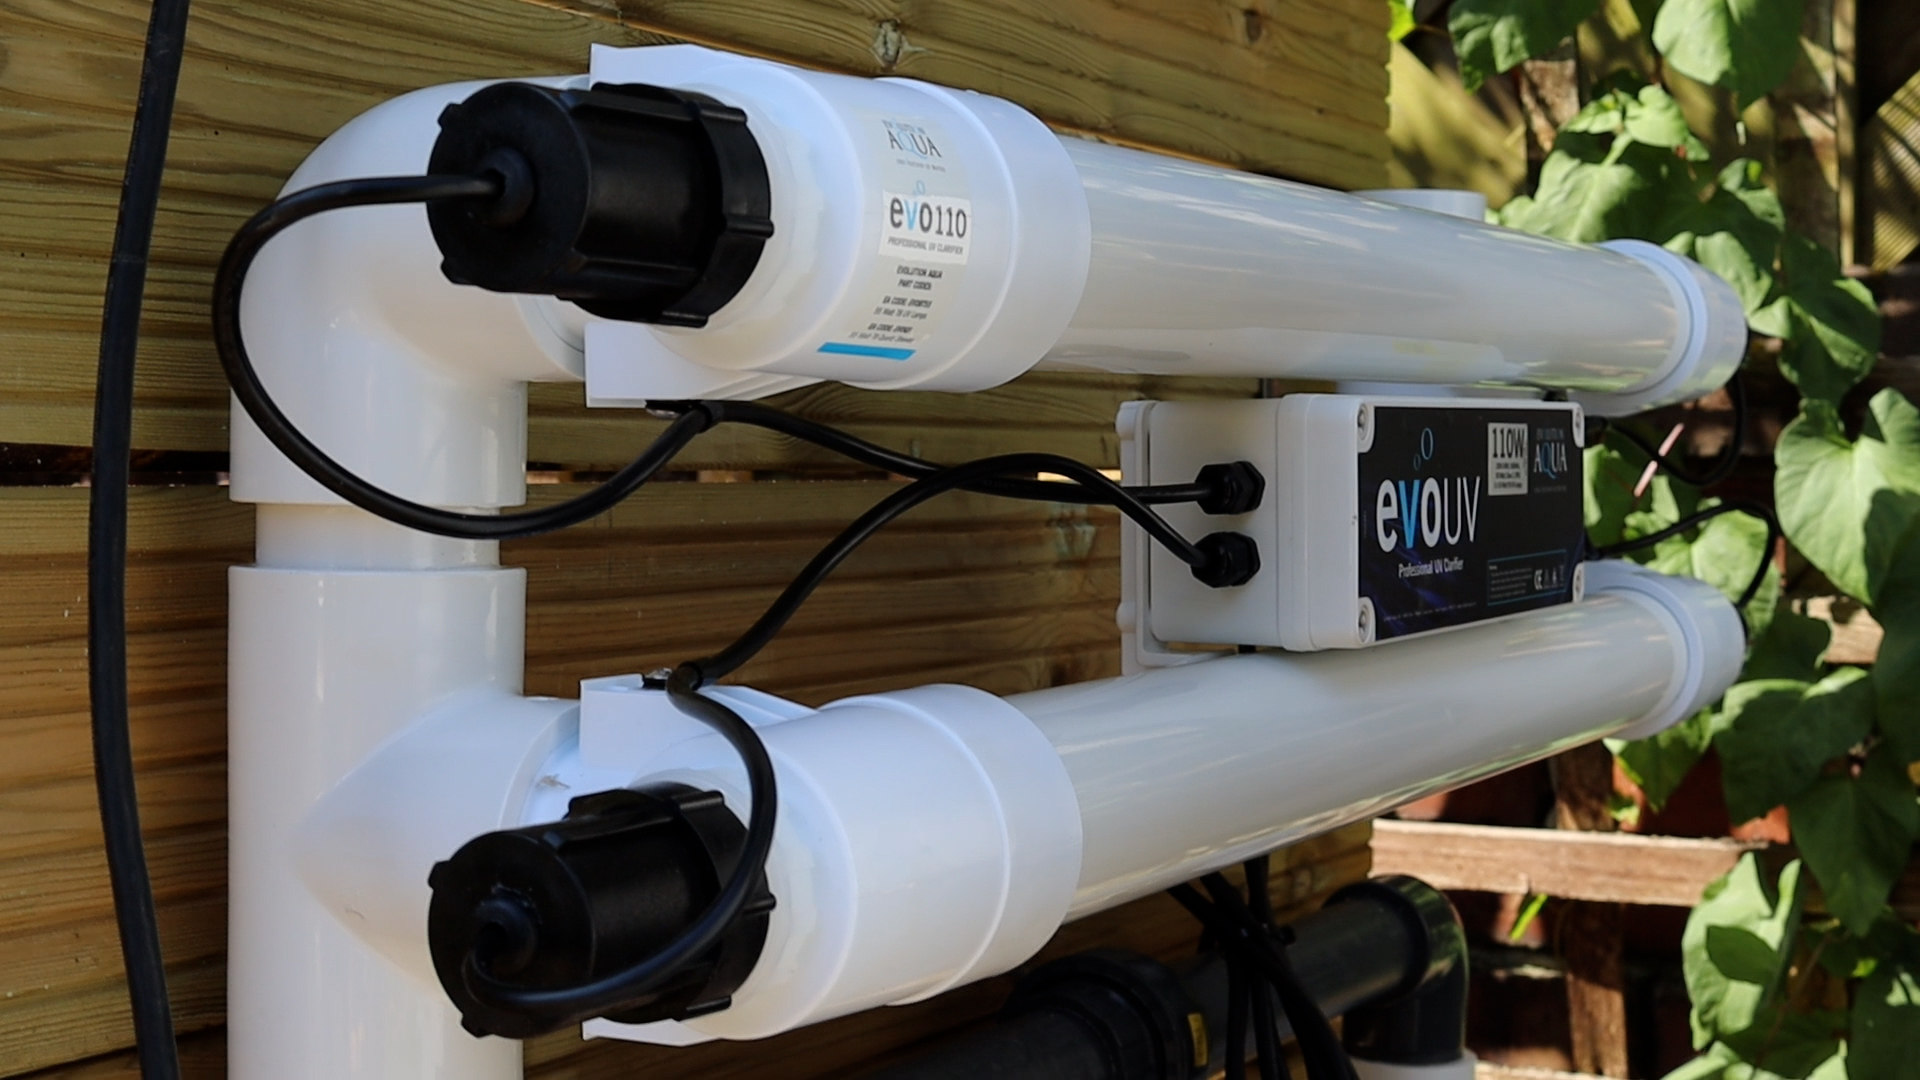 5 Top Tips: Make The Most of Your Pond UV-C Unit